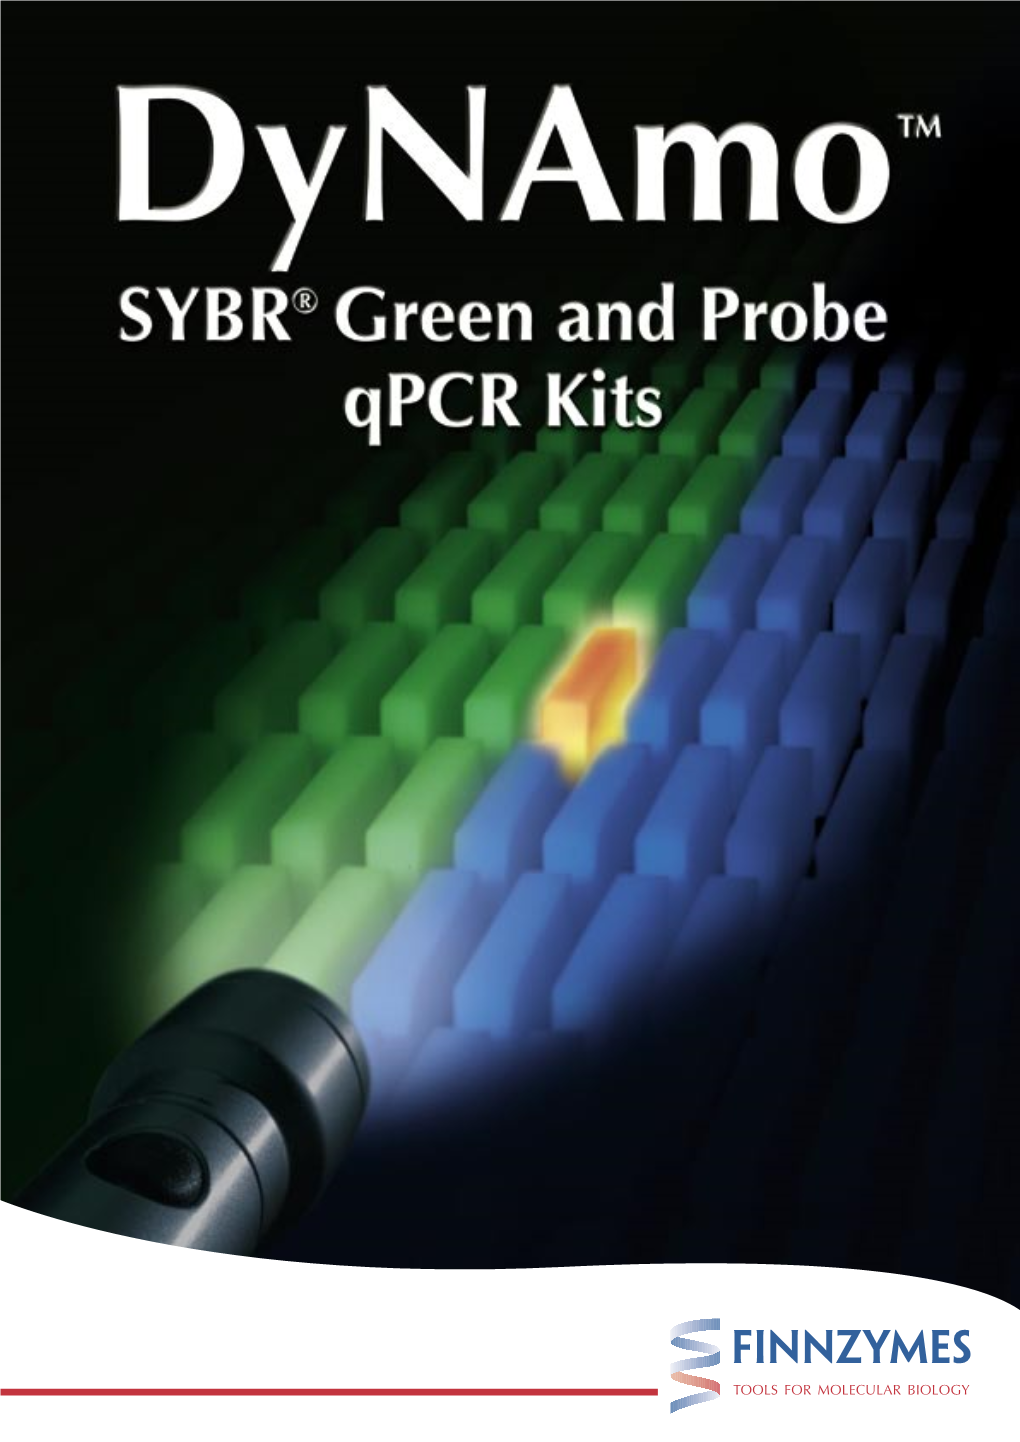 Dynamo™ Qpcr Kits Are a Superior Choice Dynamo Probe Qpcr Kit Is Designed for ™ for Quantitative Real-Time Analysis